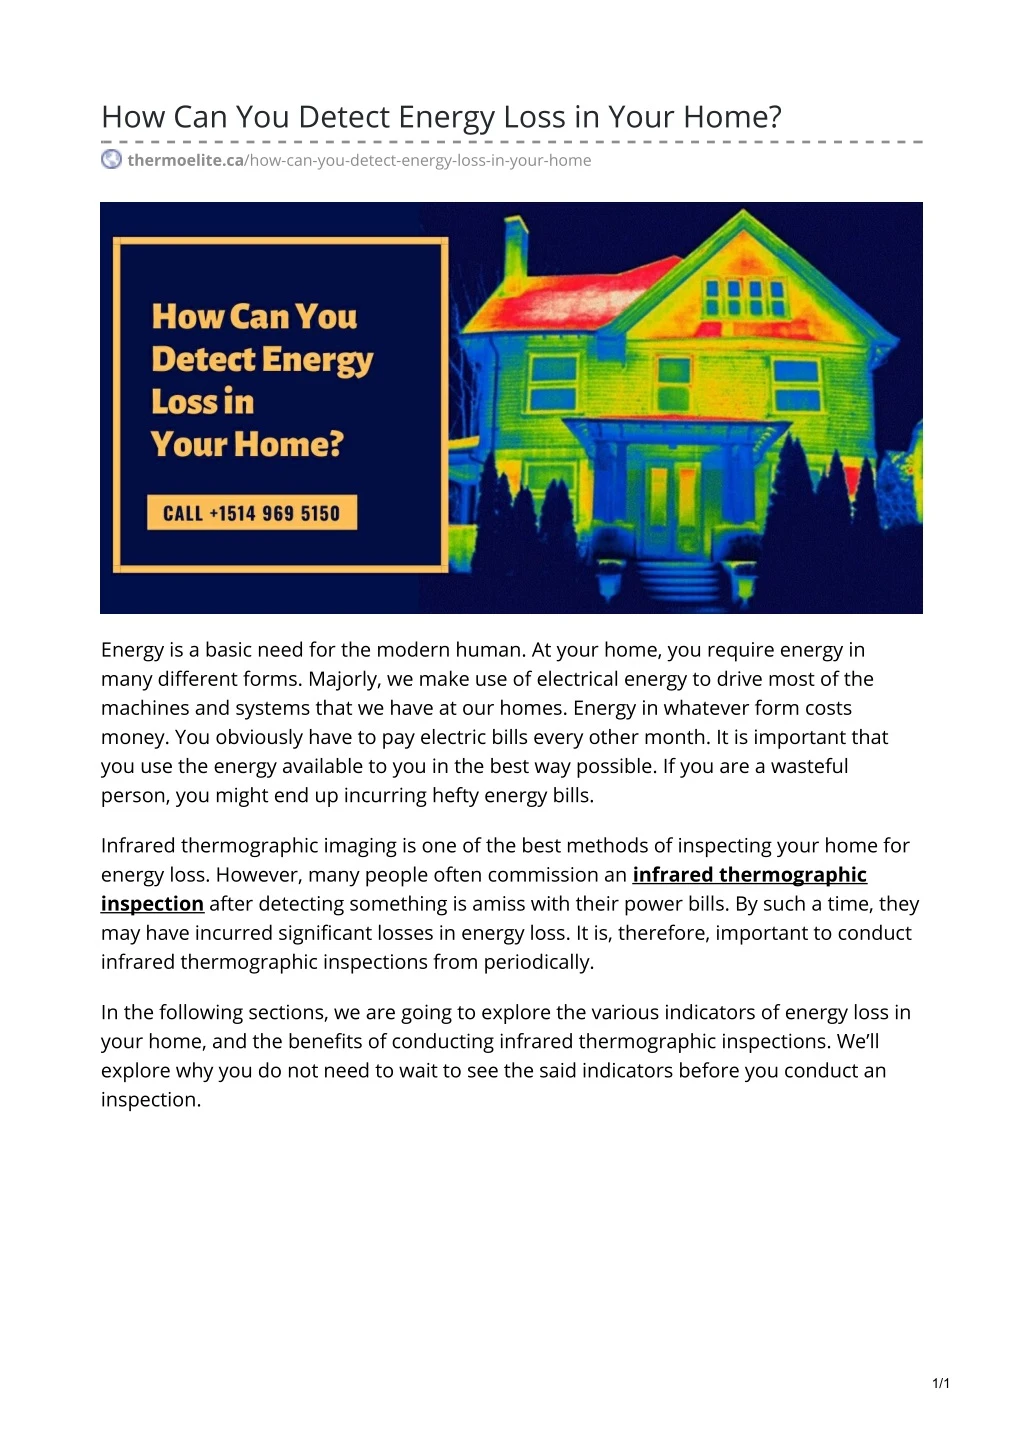 how can you detect energy loss in your home